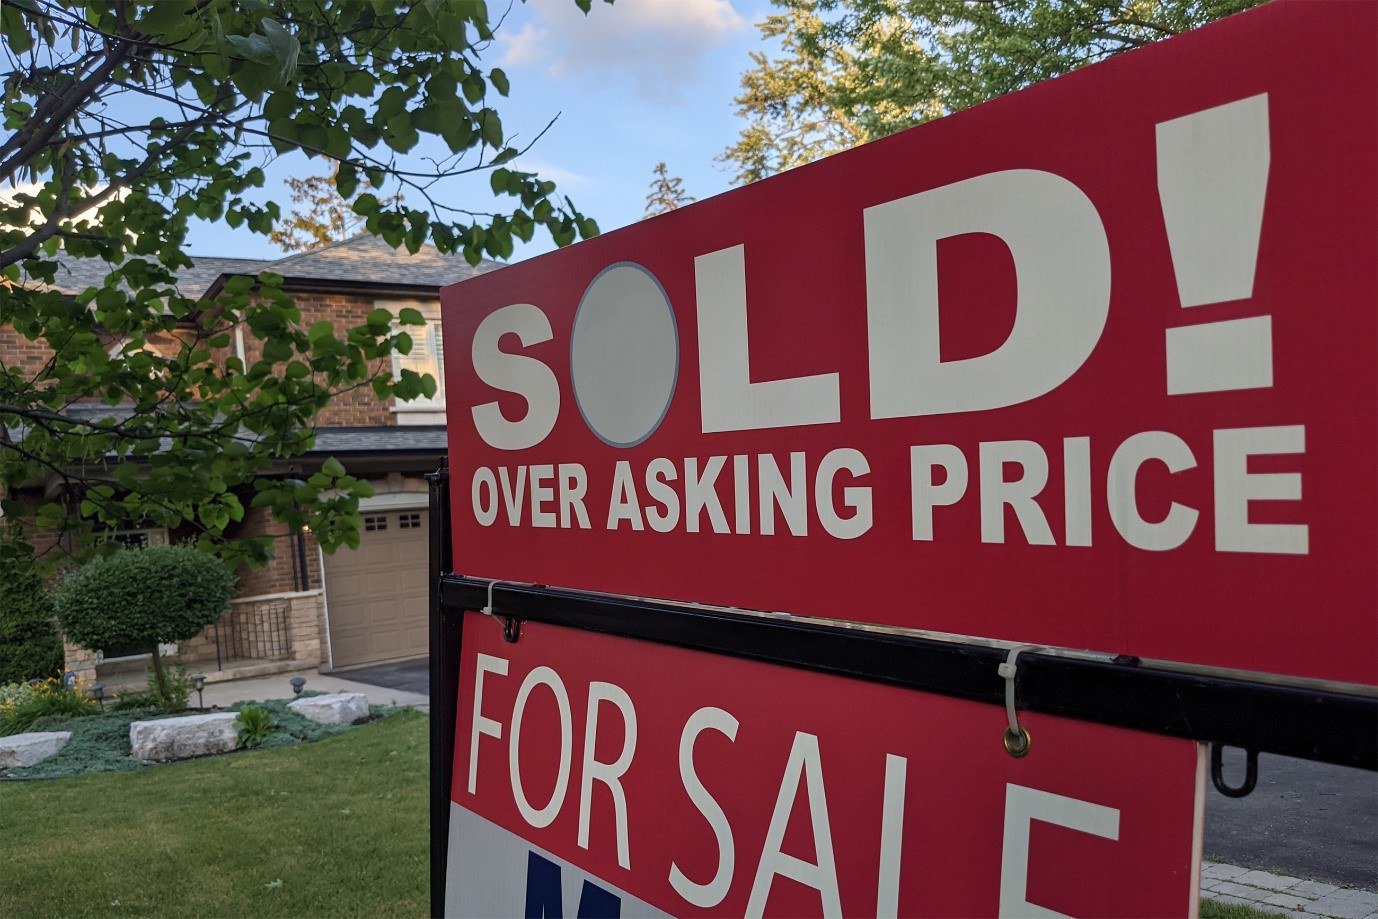 Asking prices escalate as more homes arrive to market